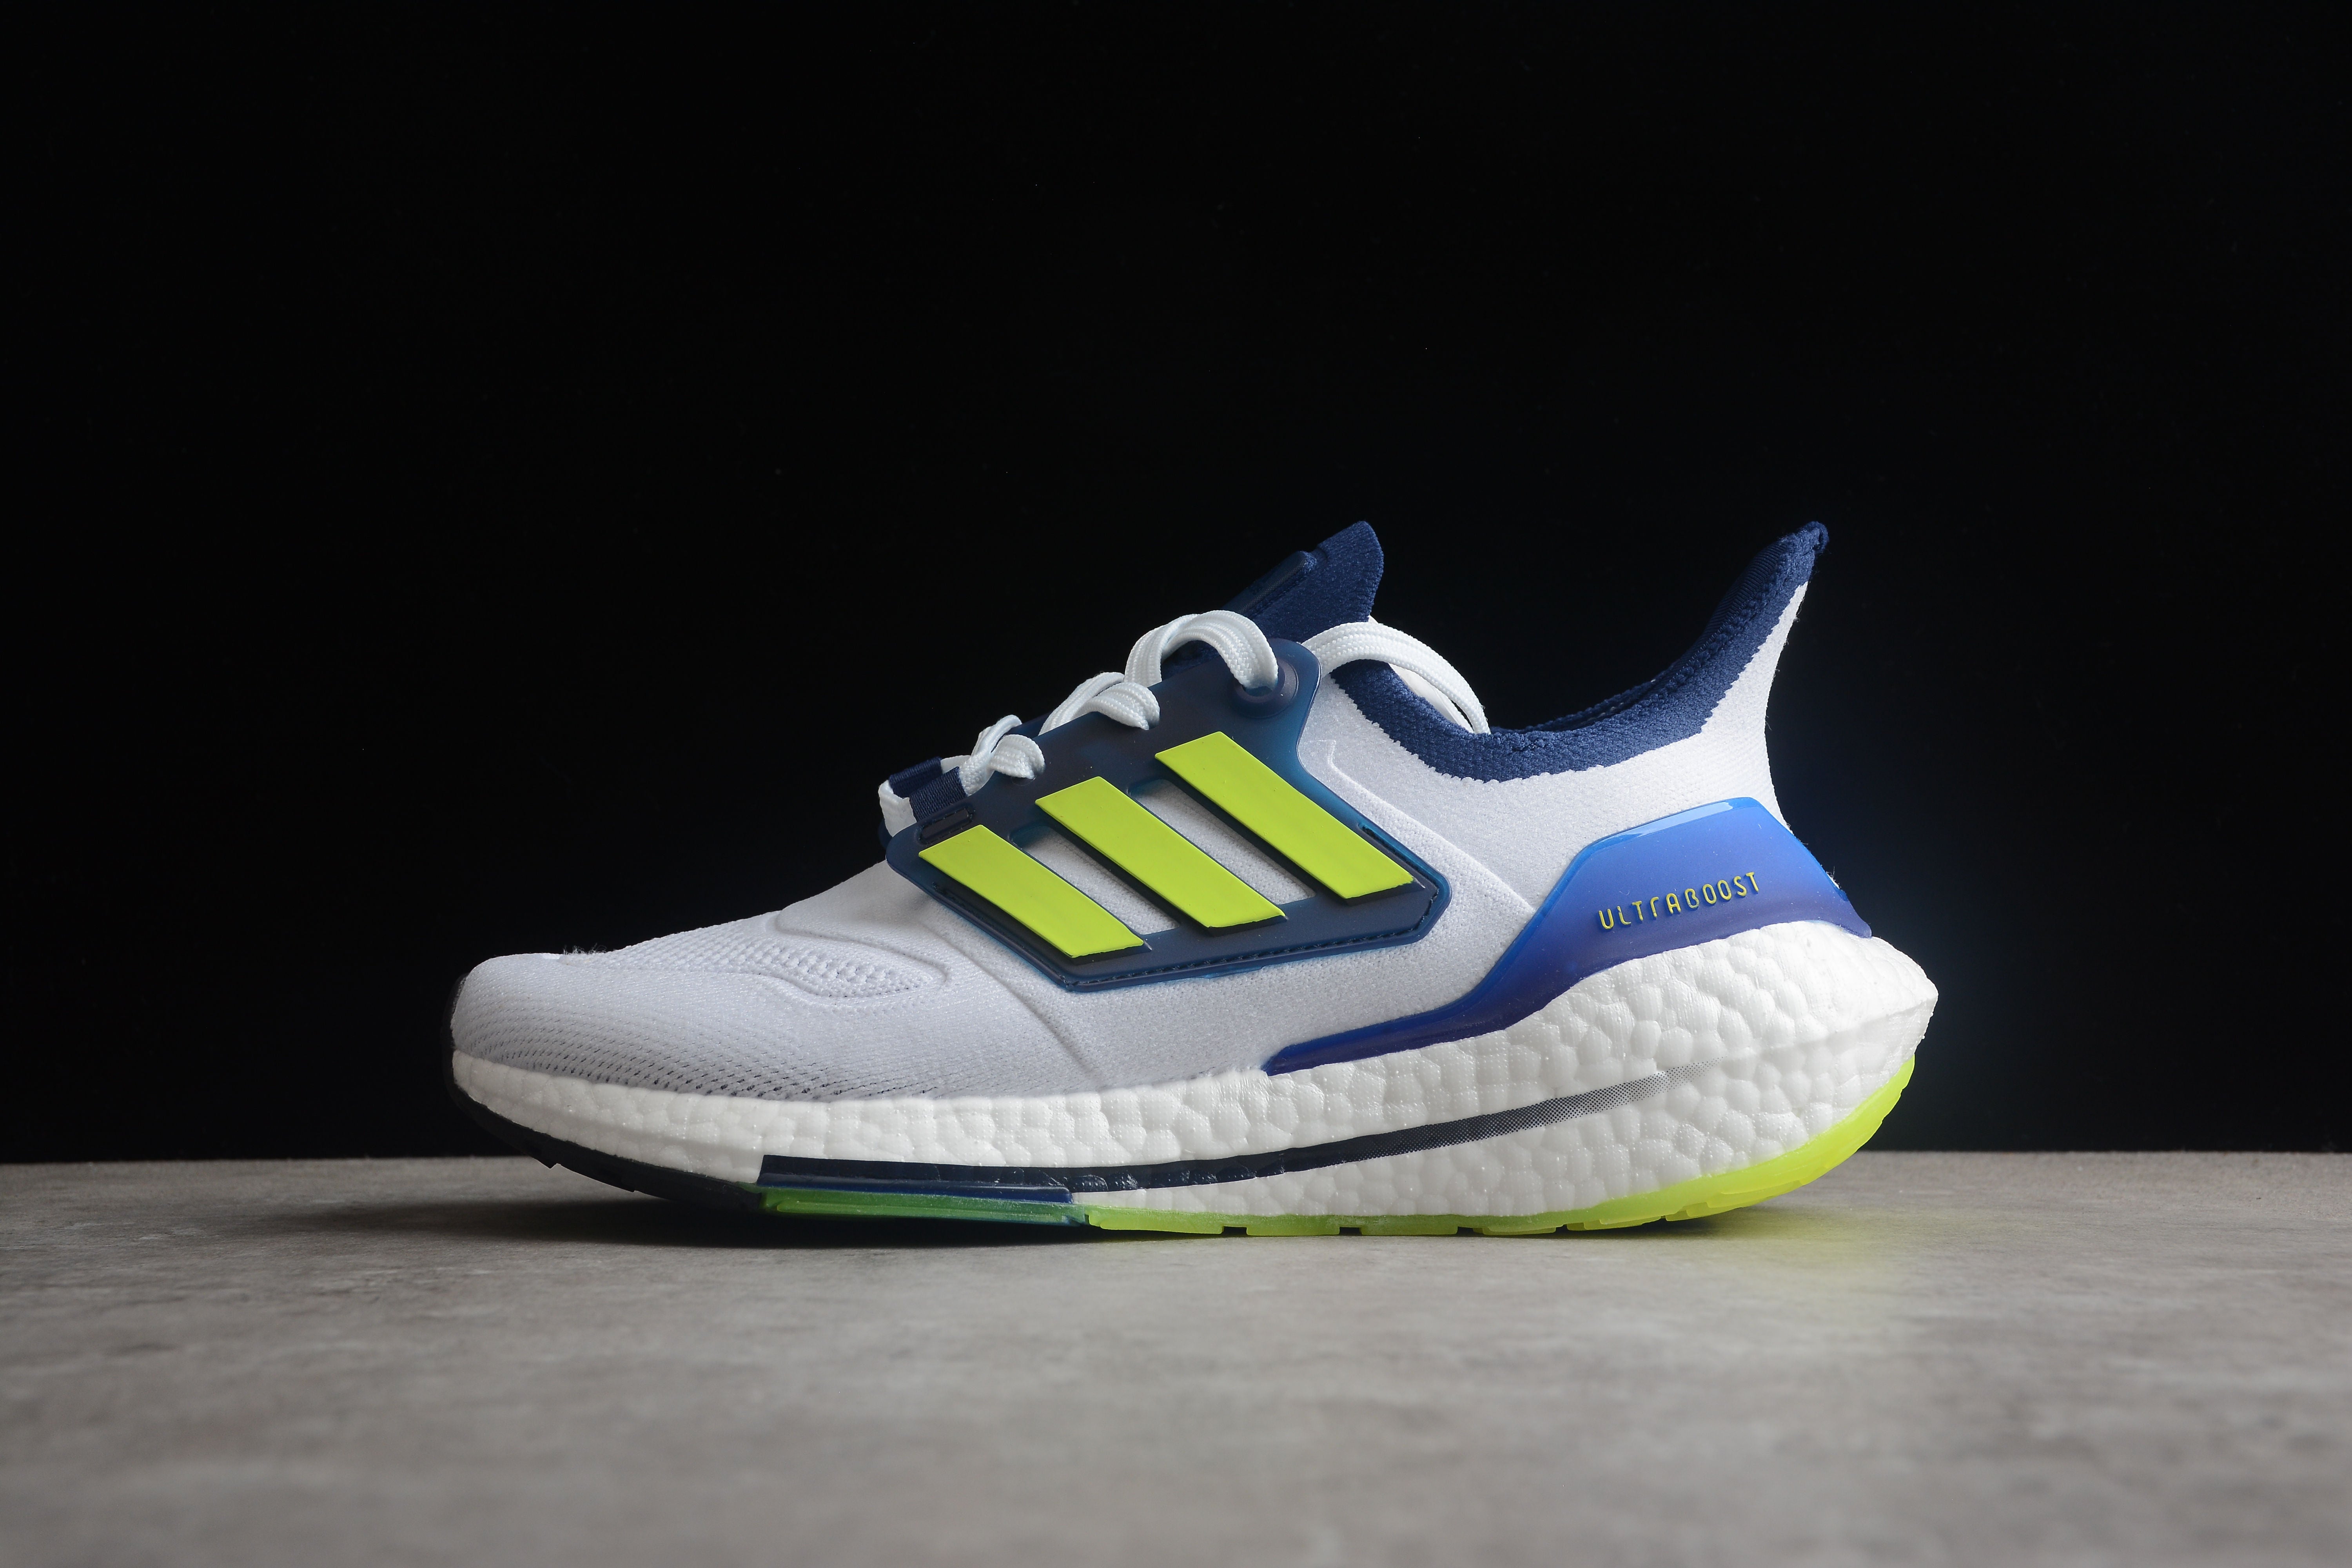 Adidas ultraboost white/yellow /blue shoes